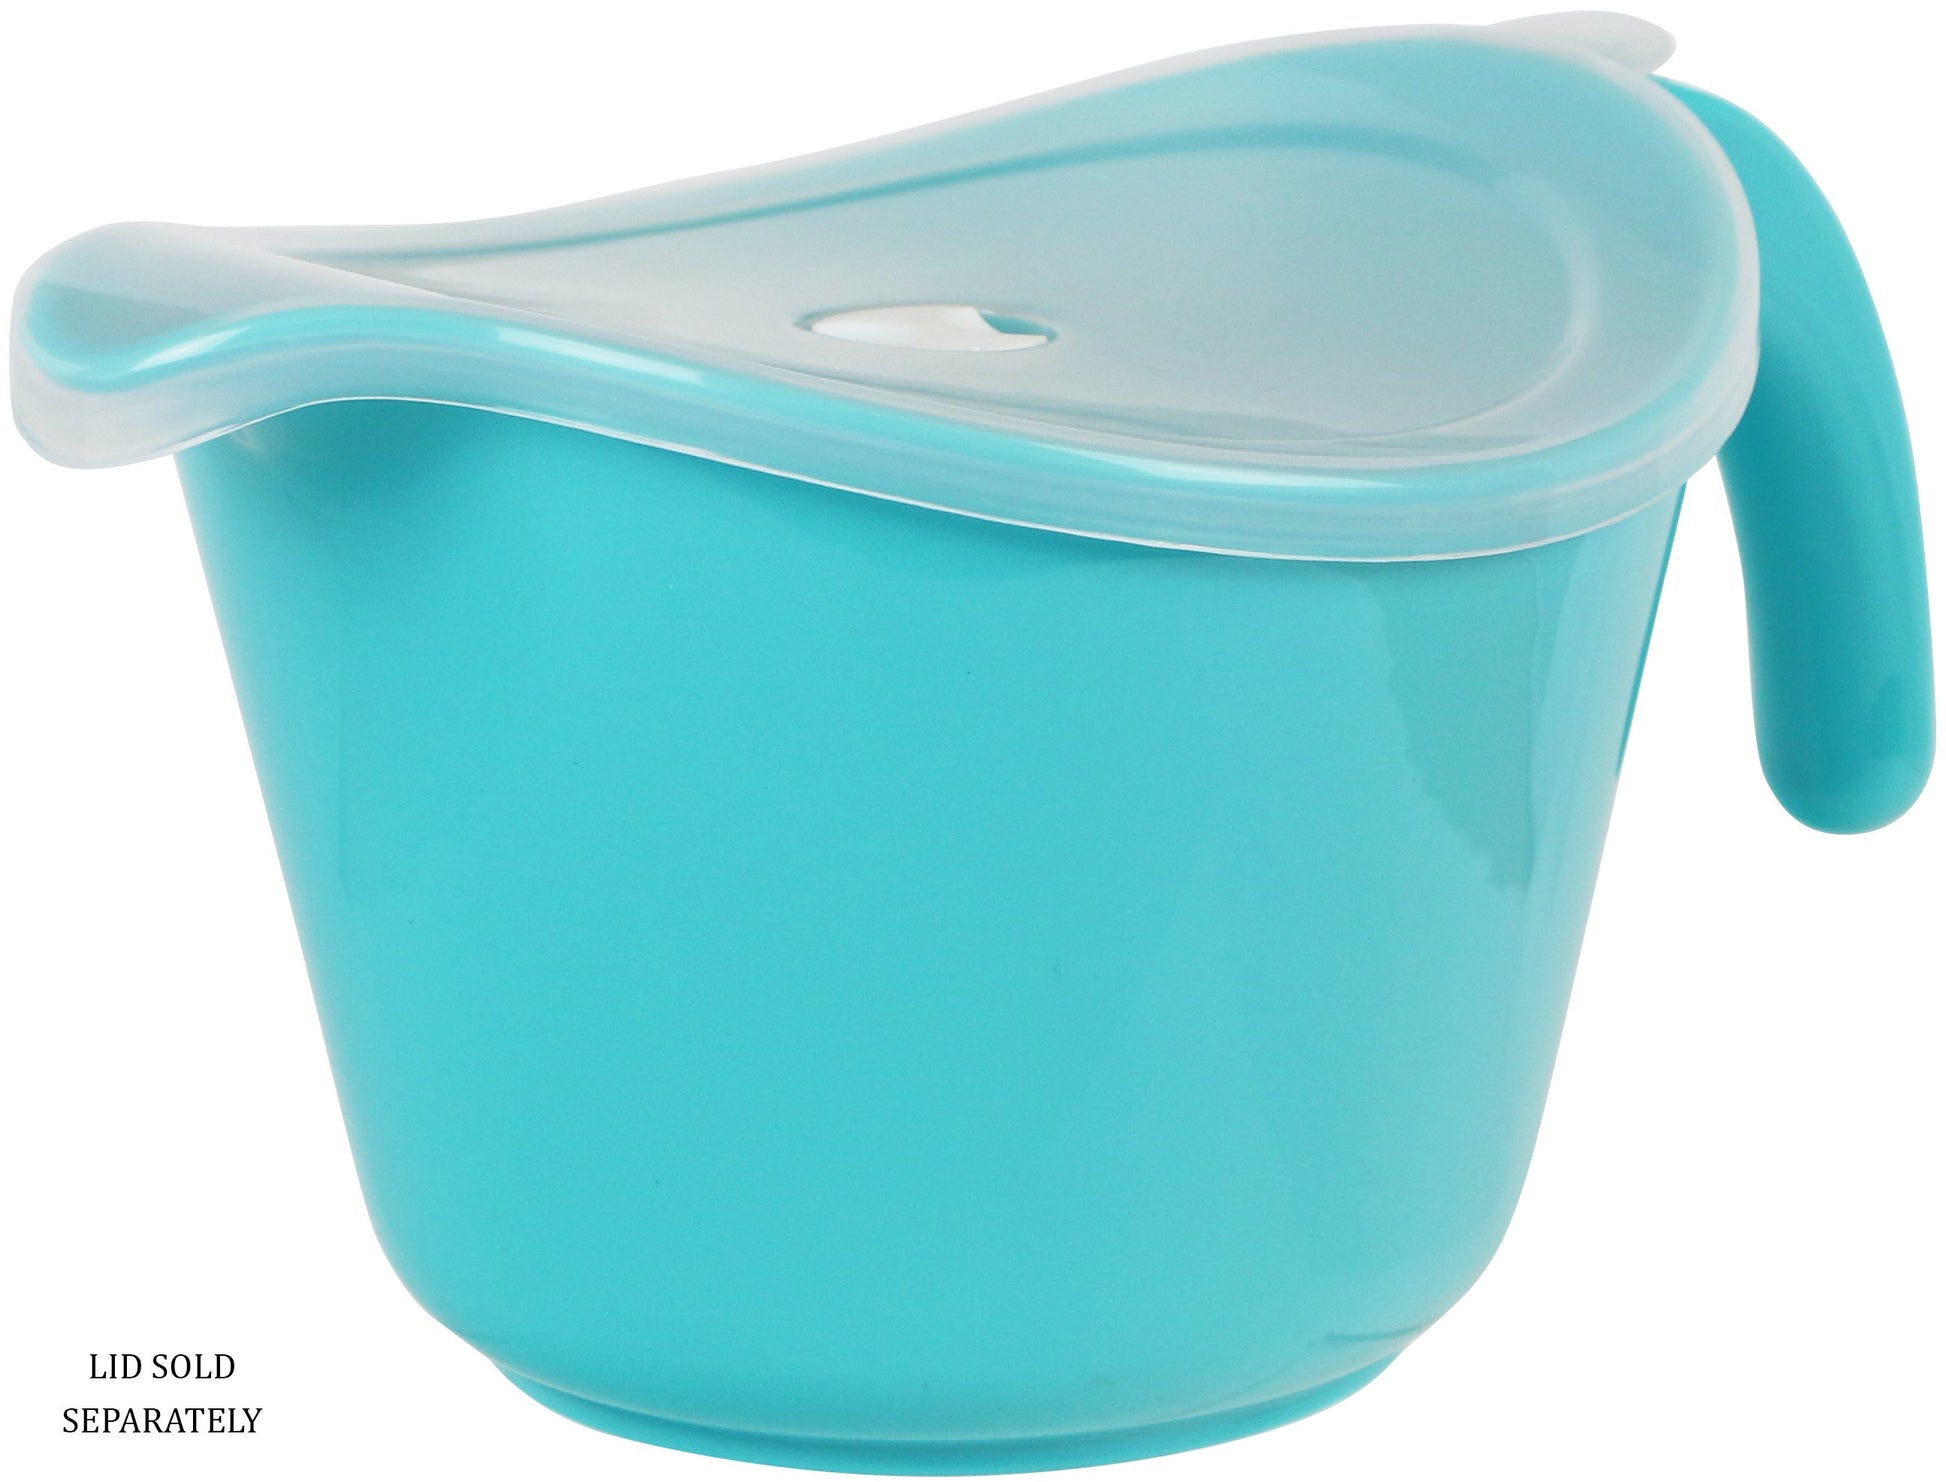 turquoise batter bowl with lid on white background.